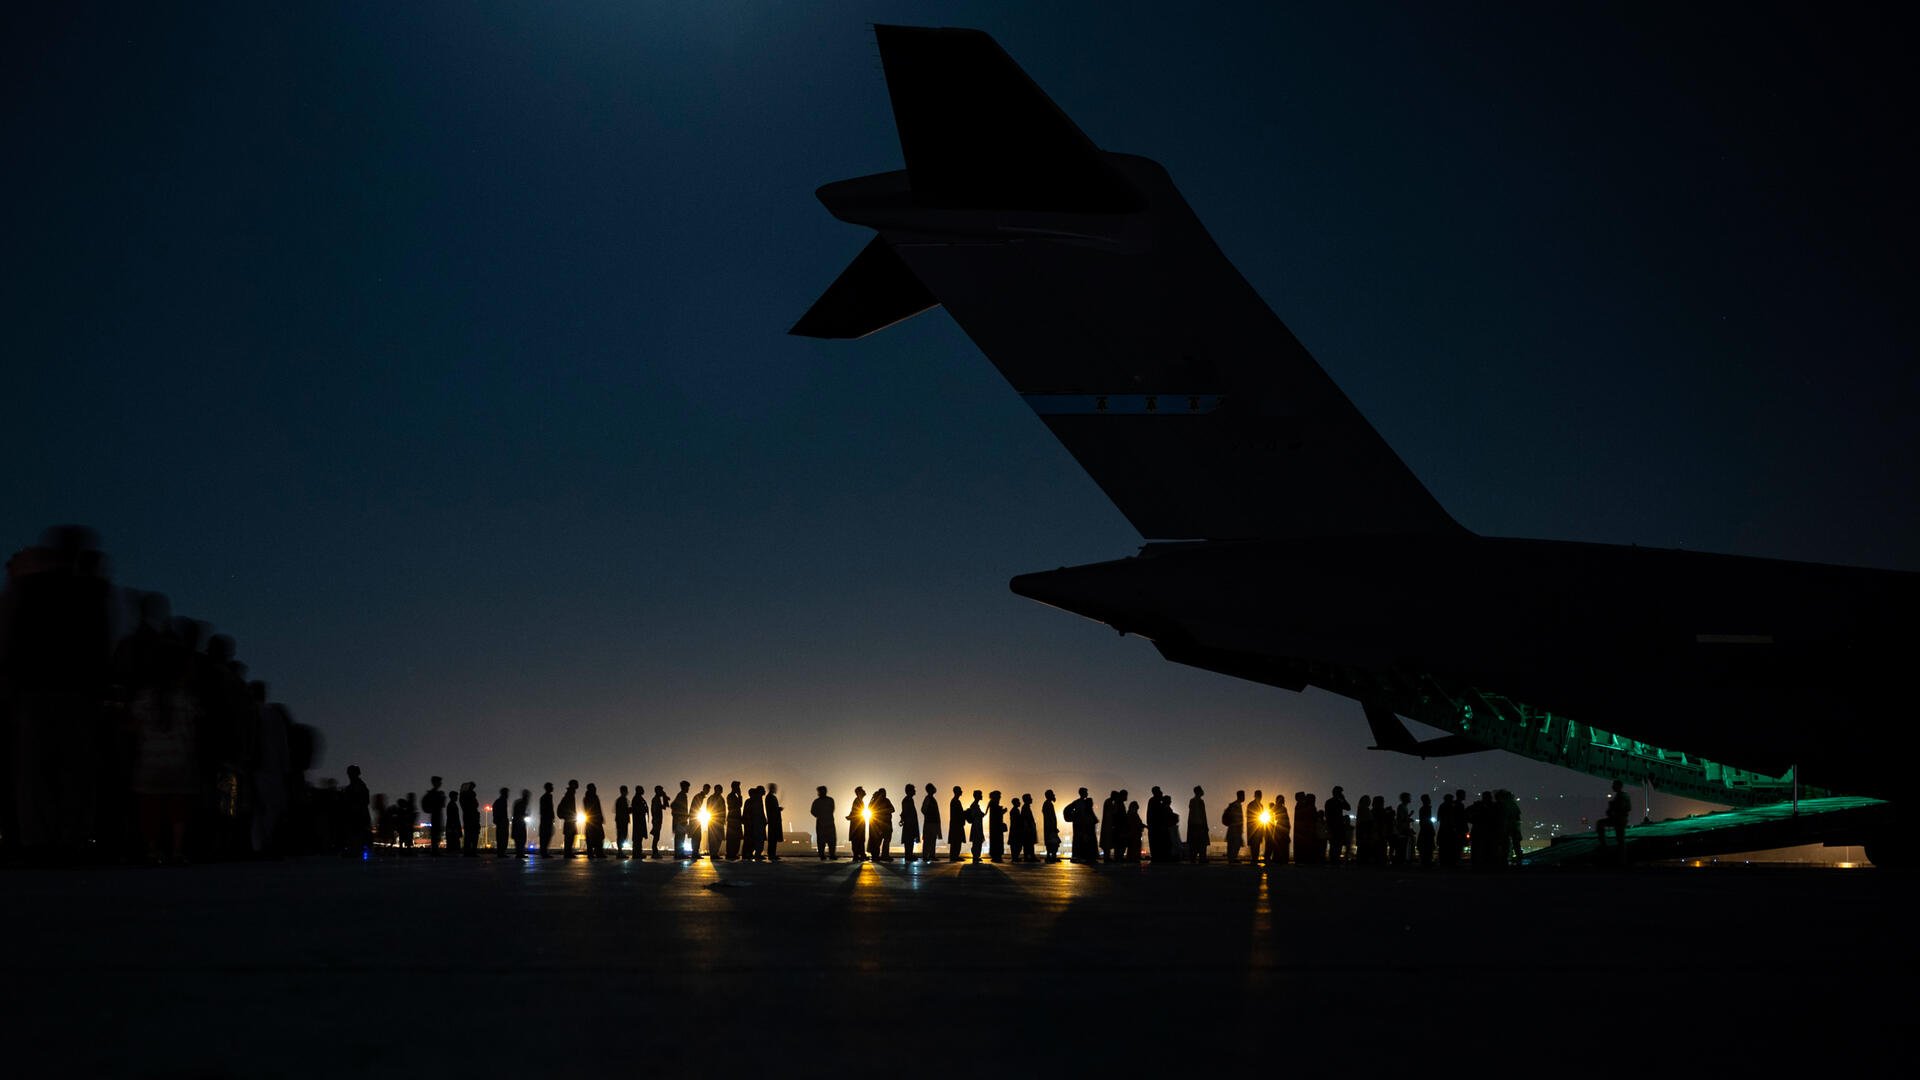 A night shot, with the tail of an airplane in the foreground and a line of people in the background. We can see a light in the distance and just the silhouette of the plane and people. 